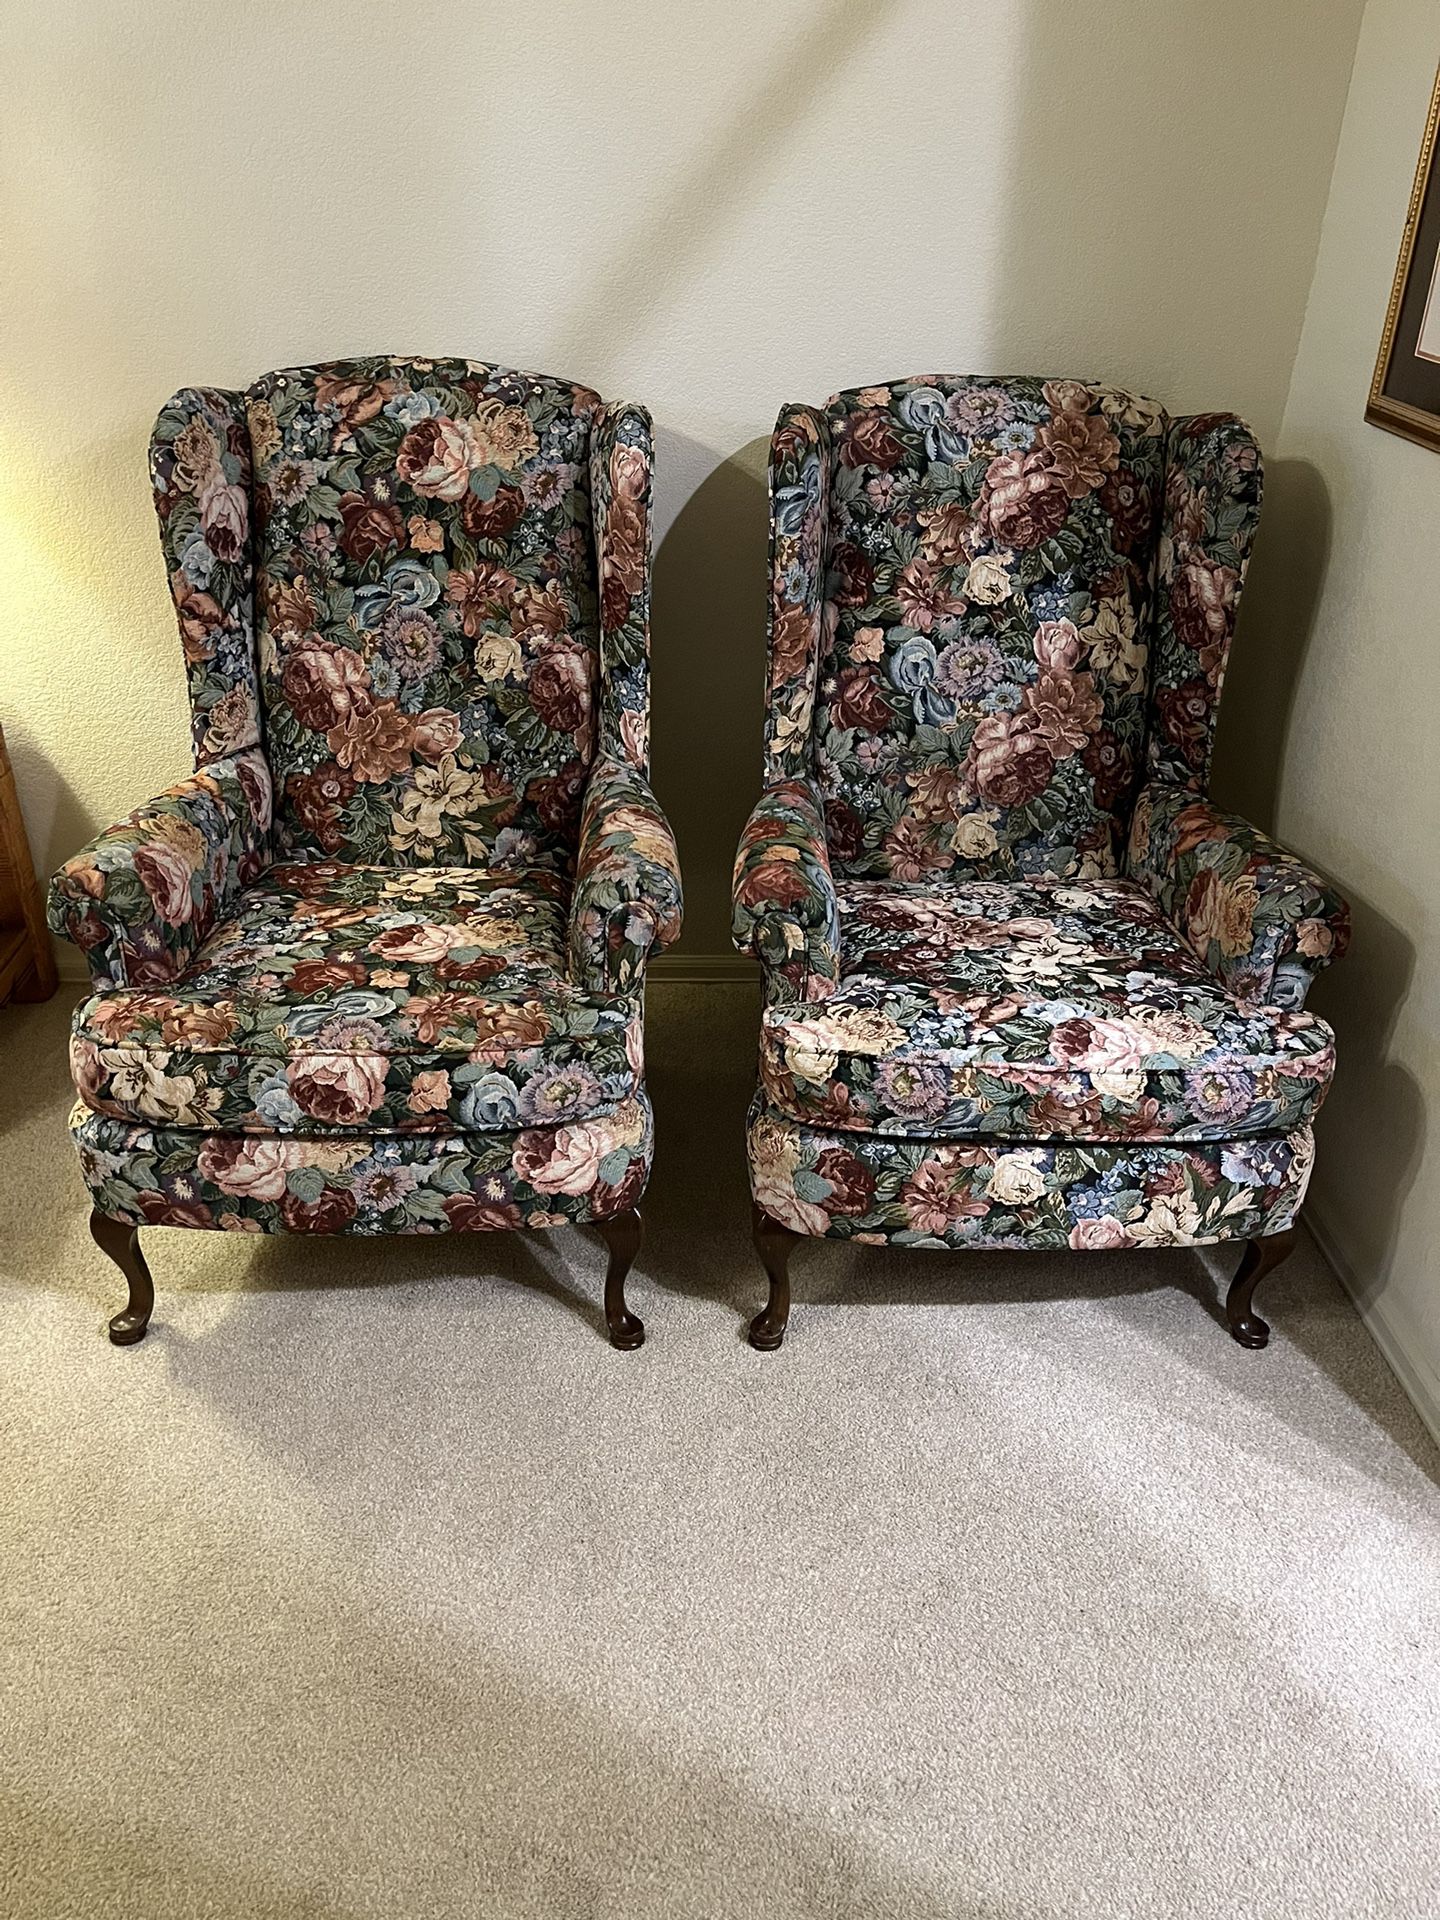 Les Brown Chair Company Wingback